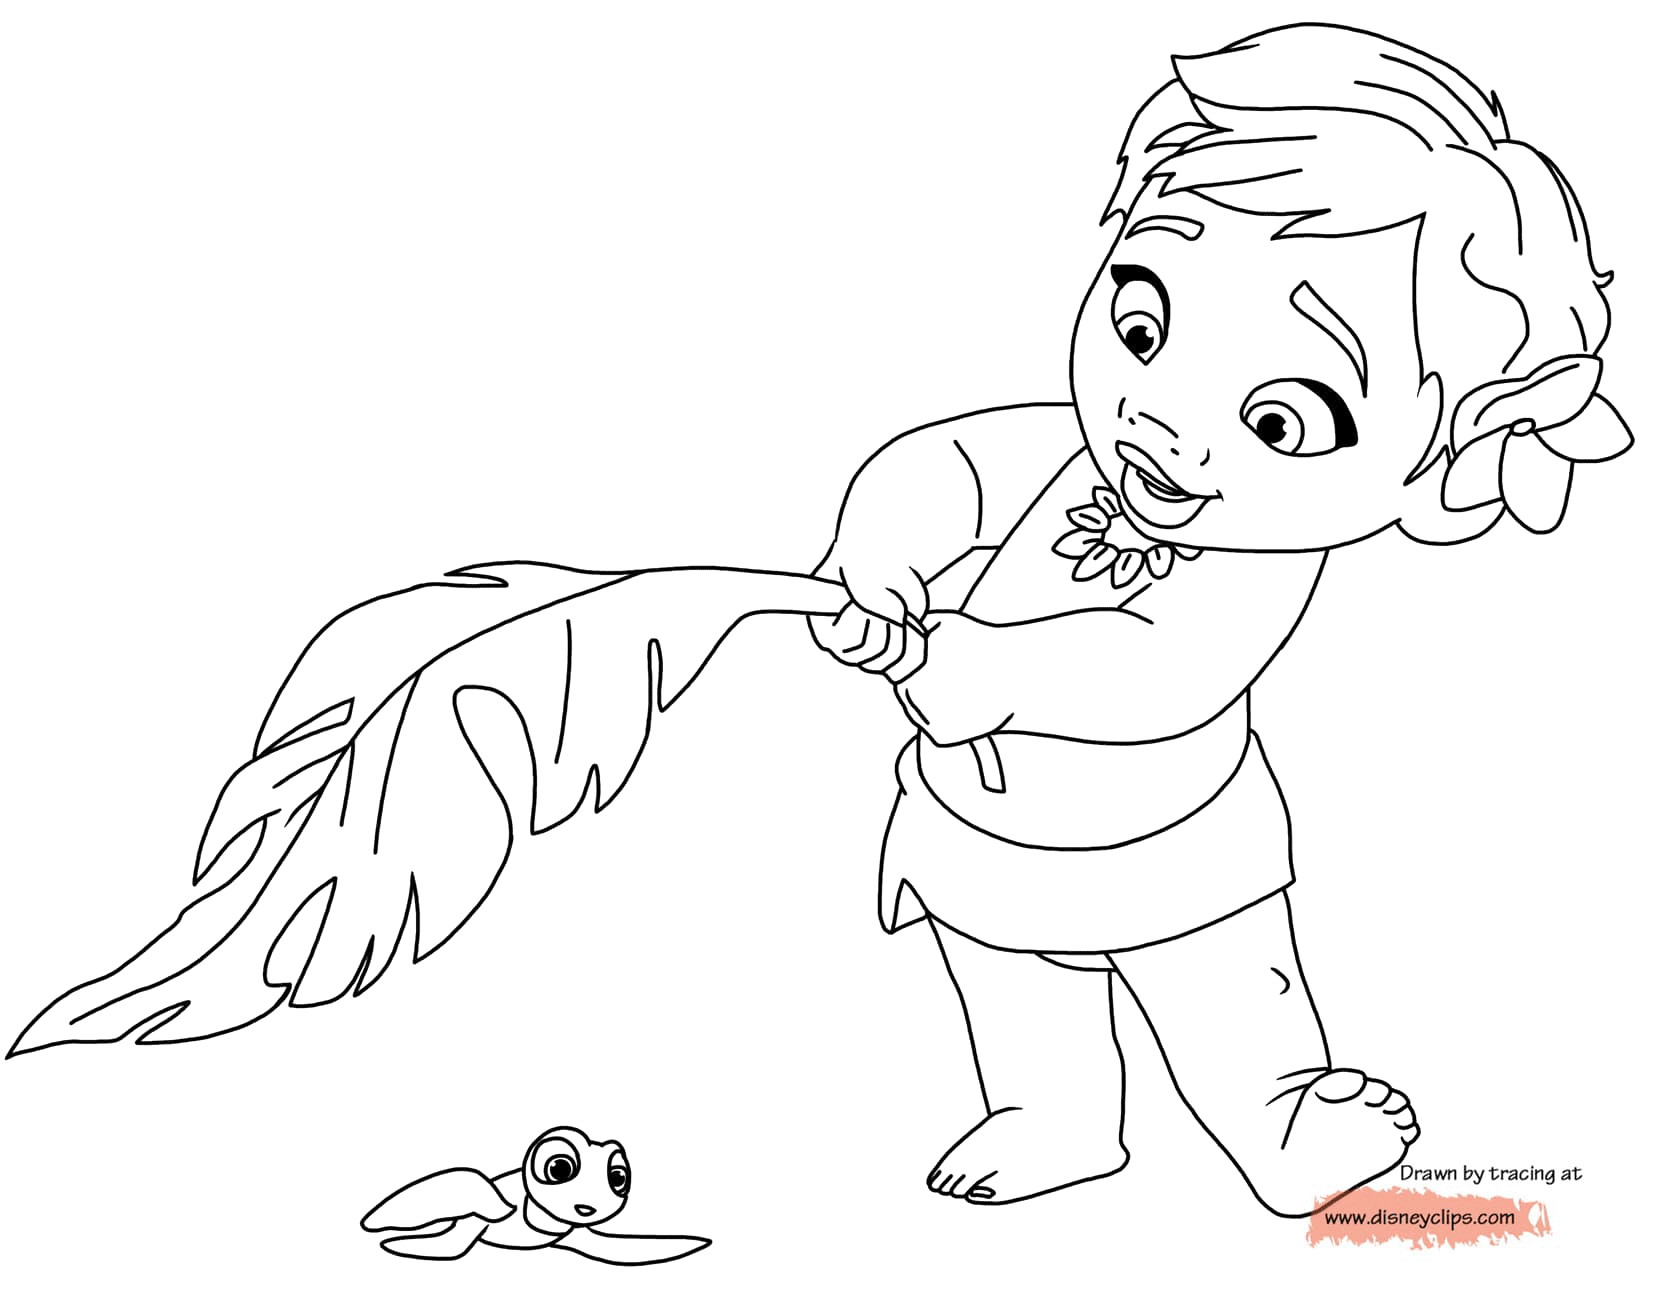 Disney #39 s Moana Printable Coloring Pages Disneyclips com